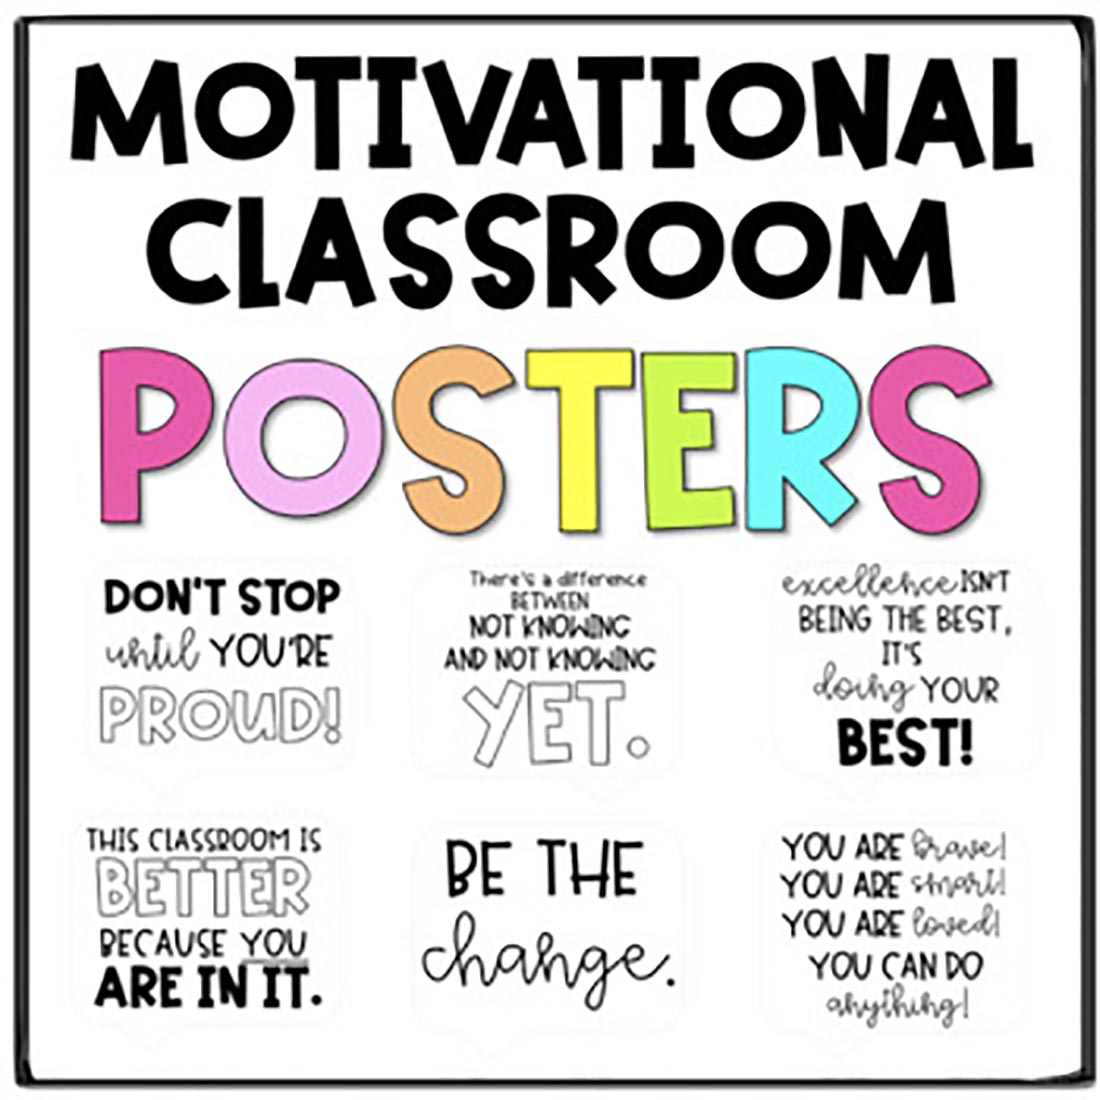 MOTIVATIONAL CLASSROOM POSTERS 20 preview image.